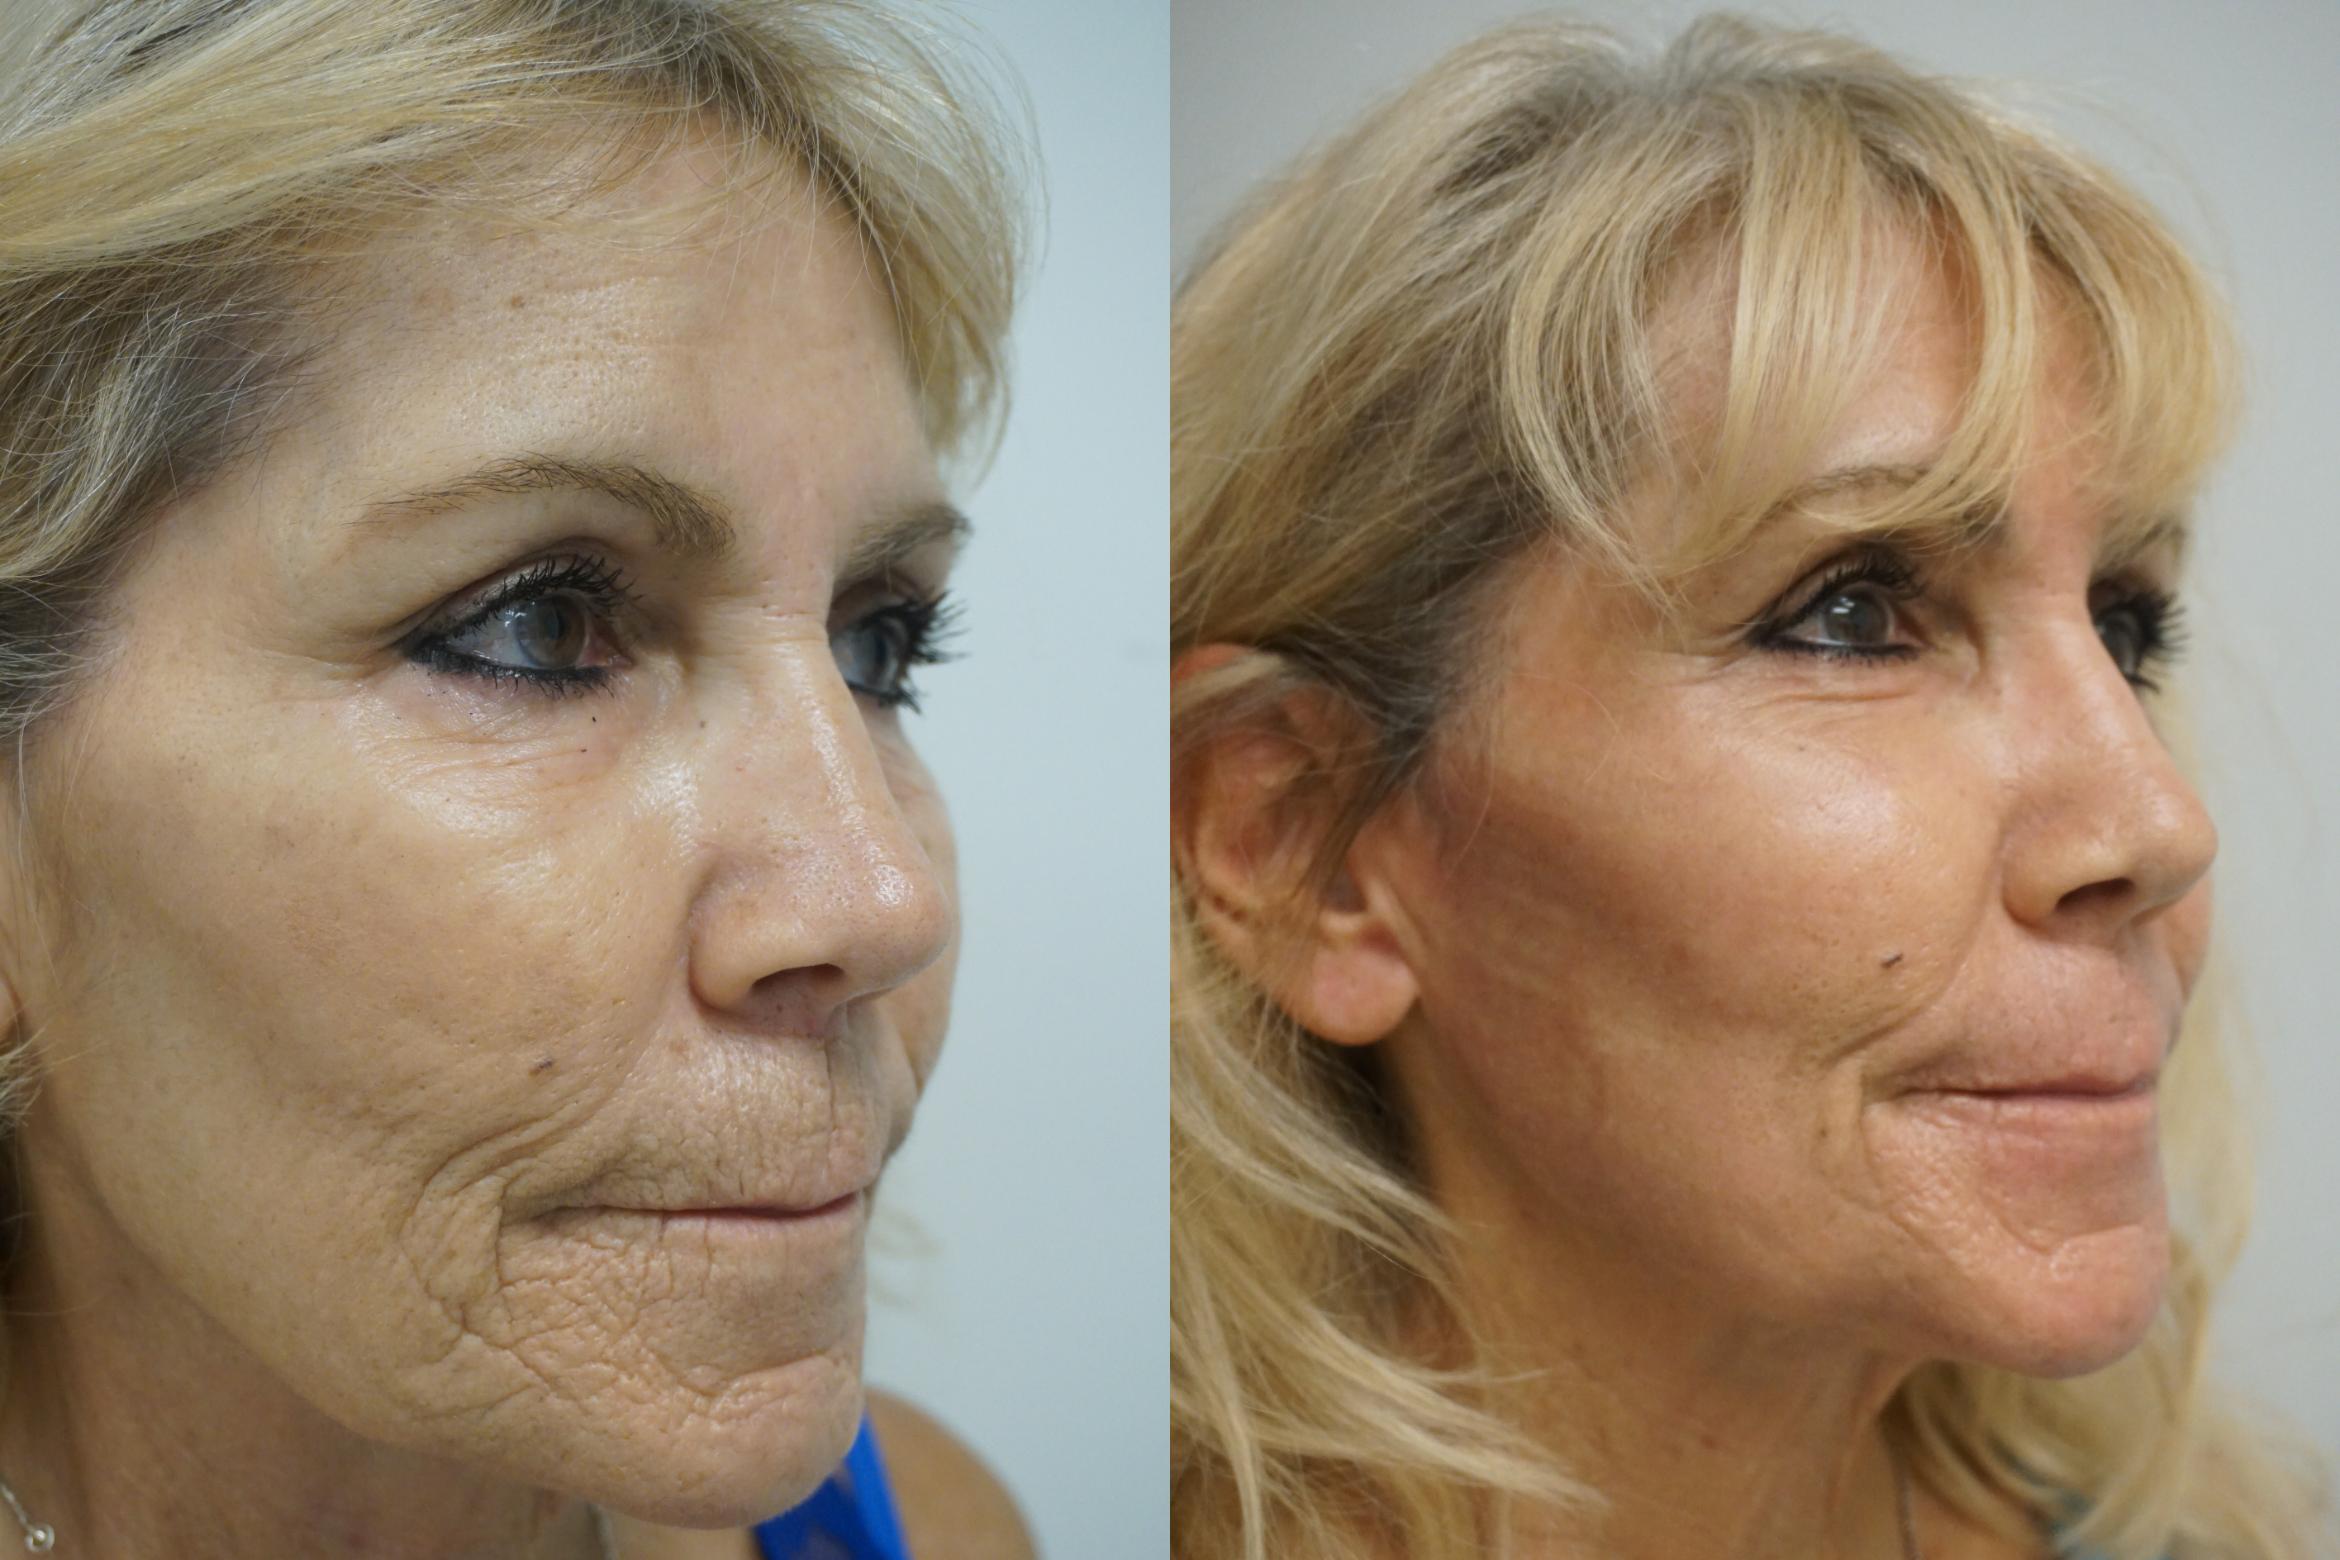 Prepare for Laser Resurfacing and Read the Article to Learn More About Laser Skin Resurfacing